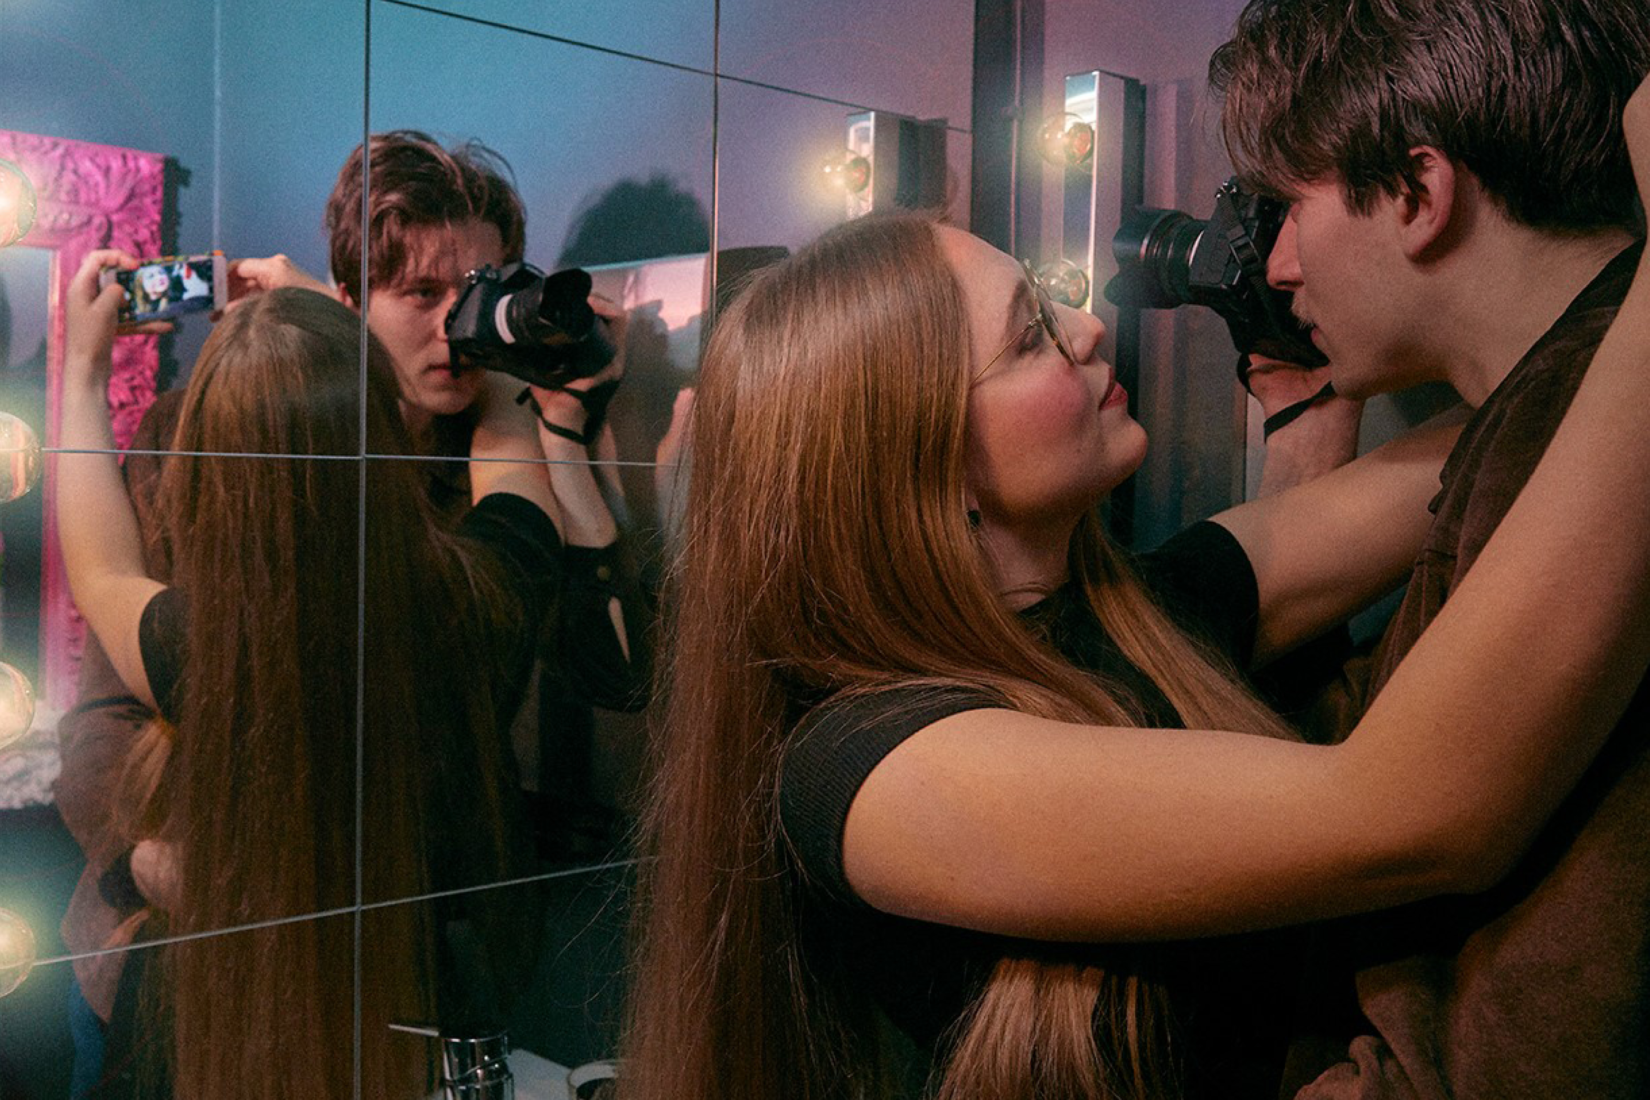 A man and a girl about to kiss while filming themselves